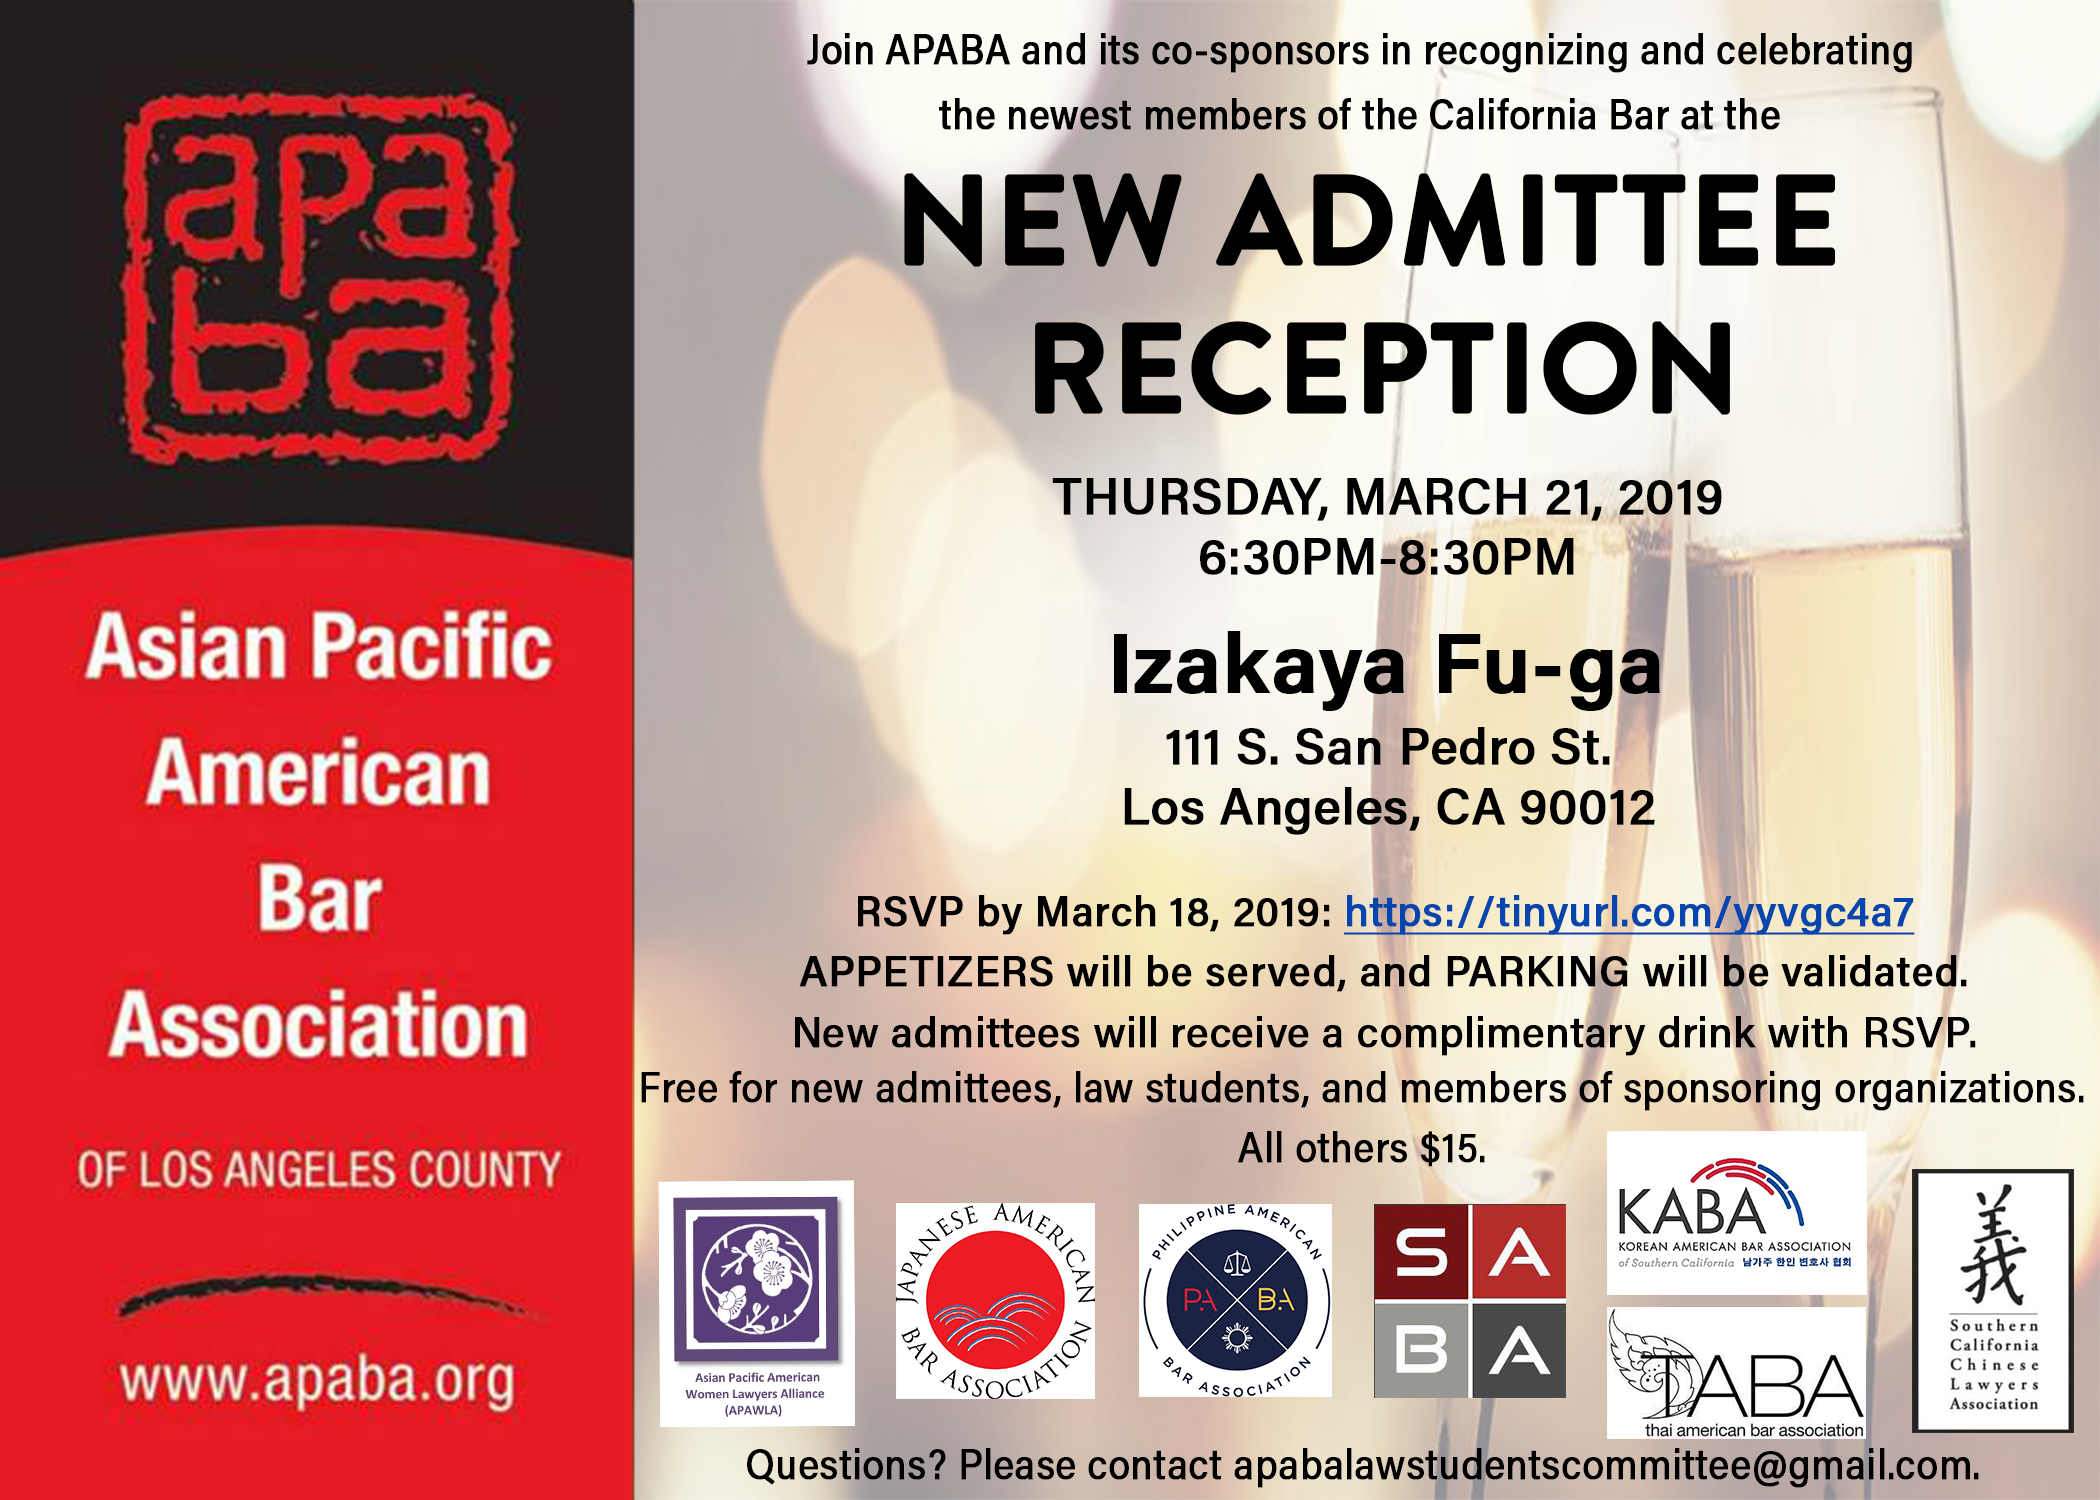 March 21 – New Admittee Reception